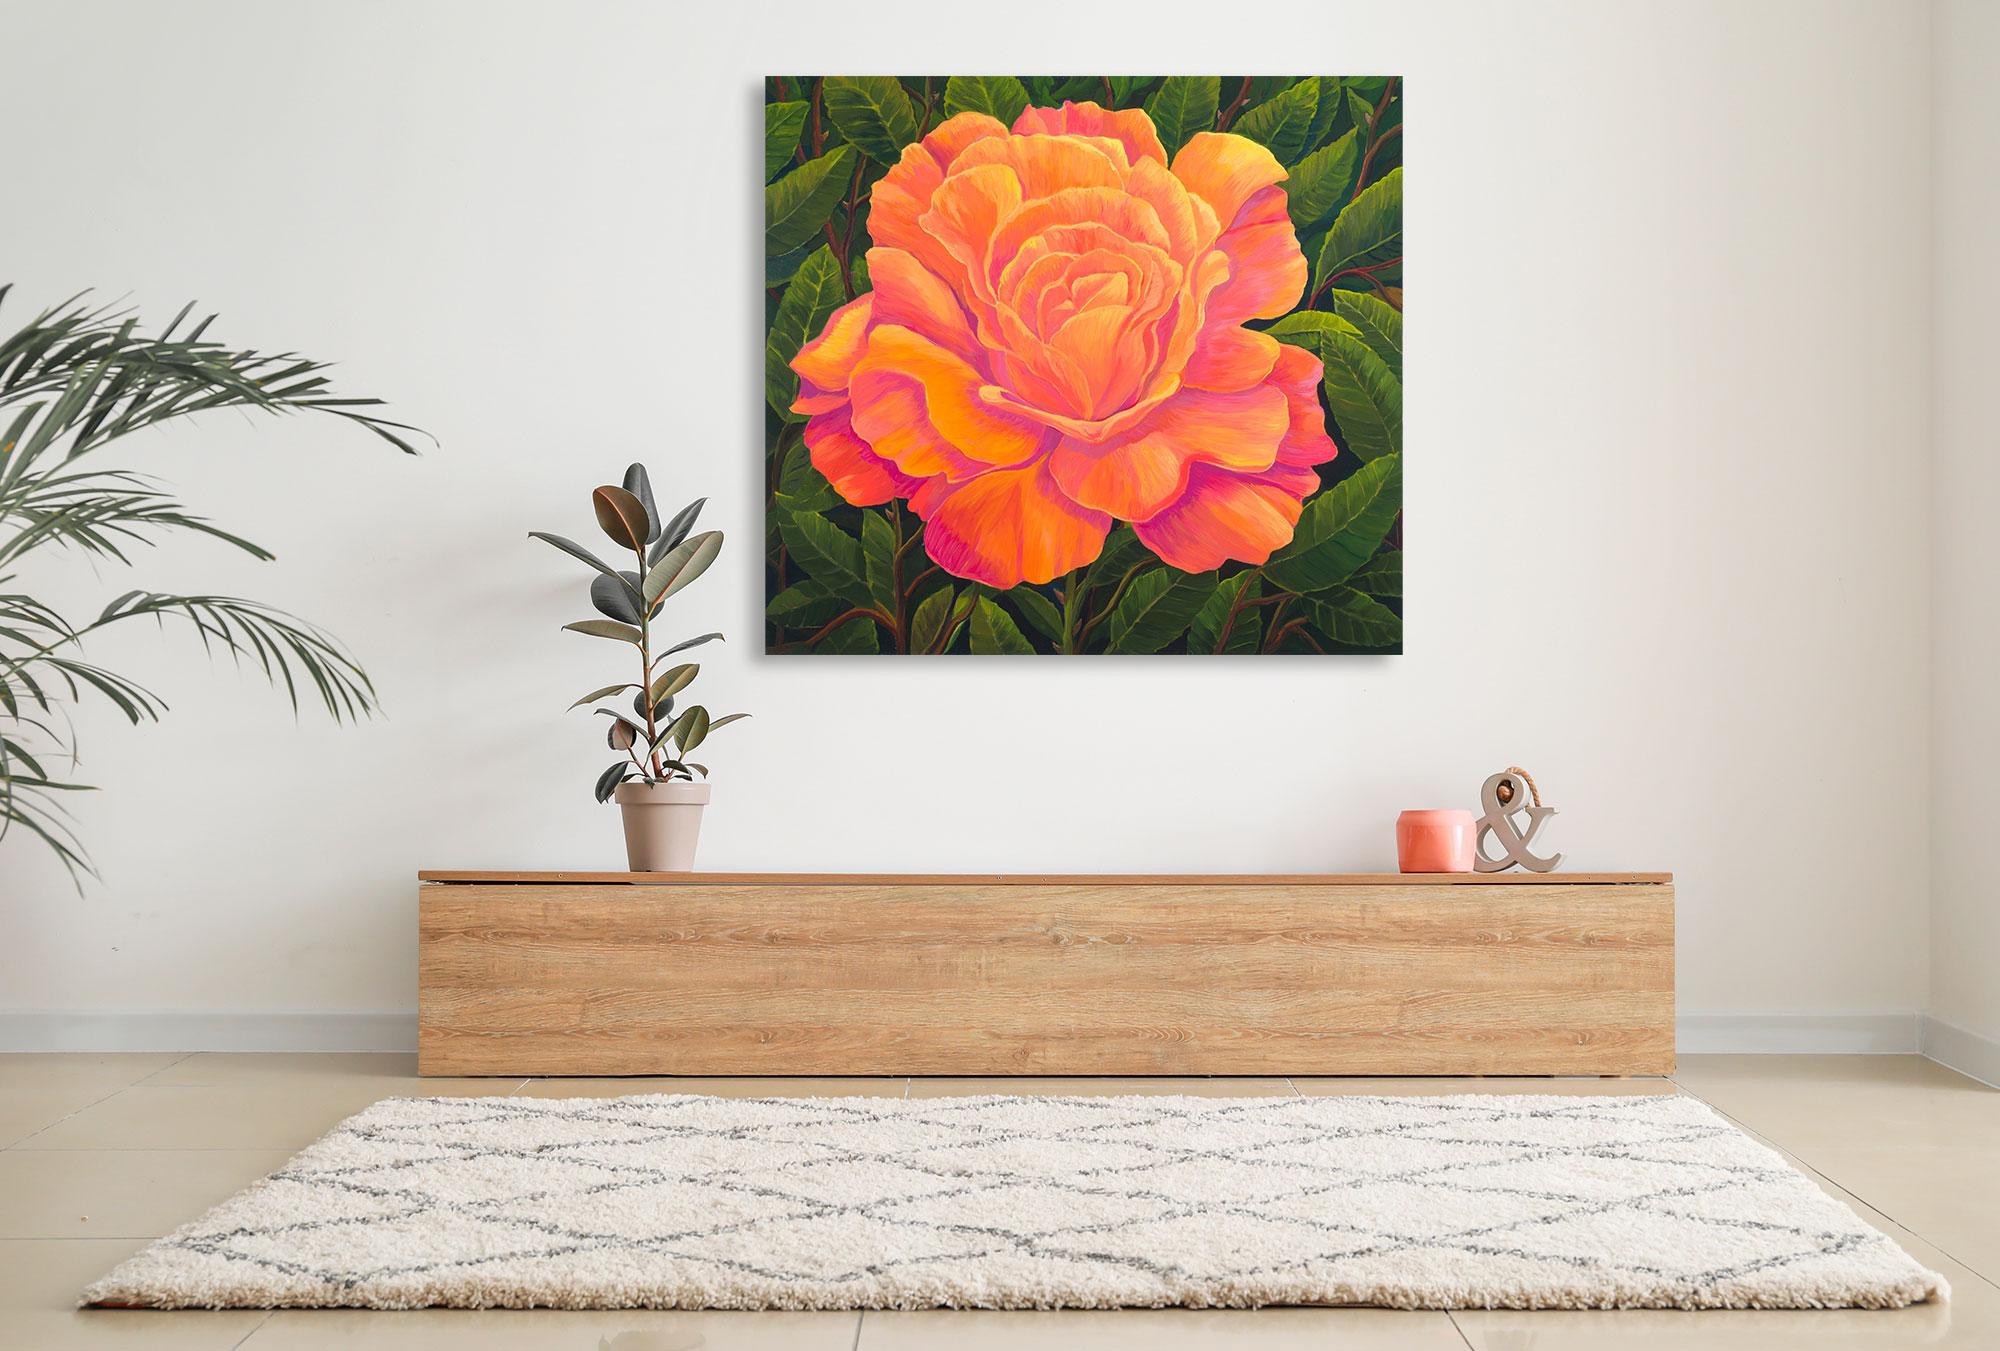 Tequila Sunrise Rose Close Up -Oil On Canvas - Landscape Painting By Dante Rondo For Sale 1